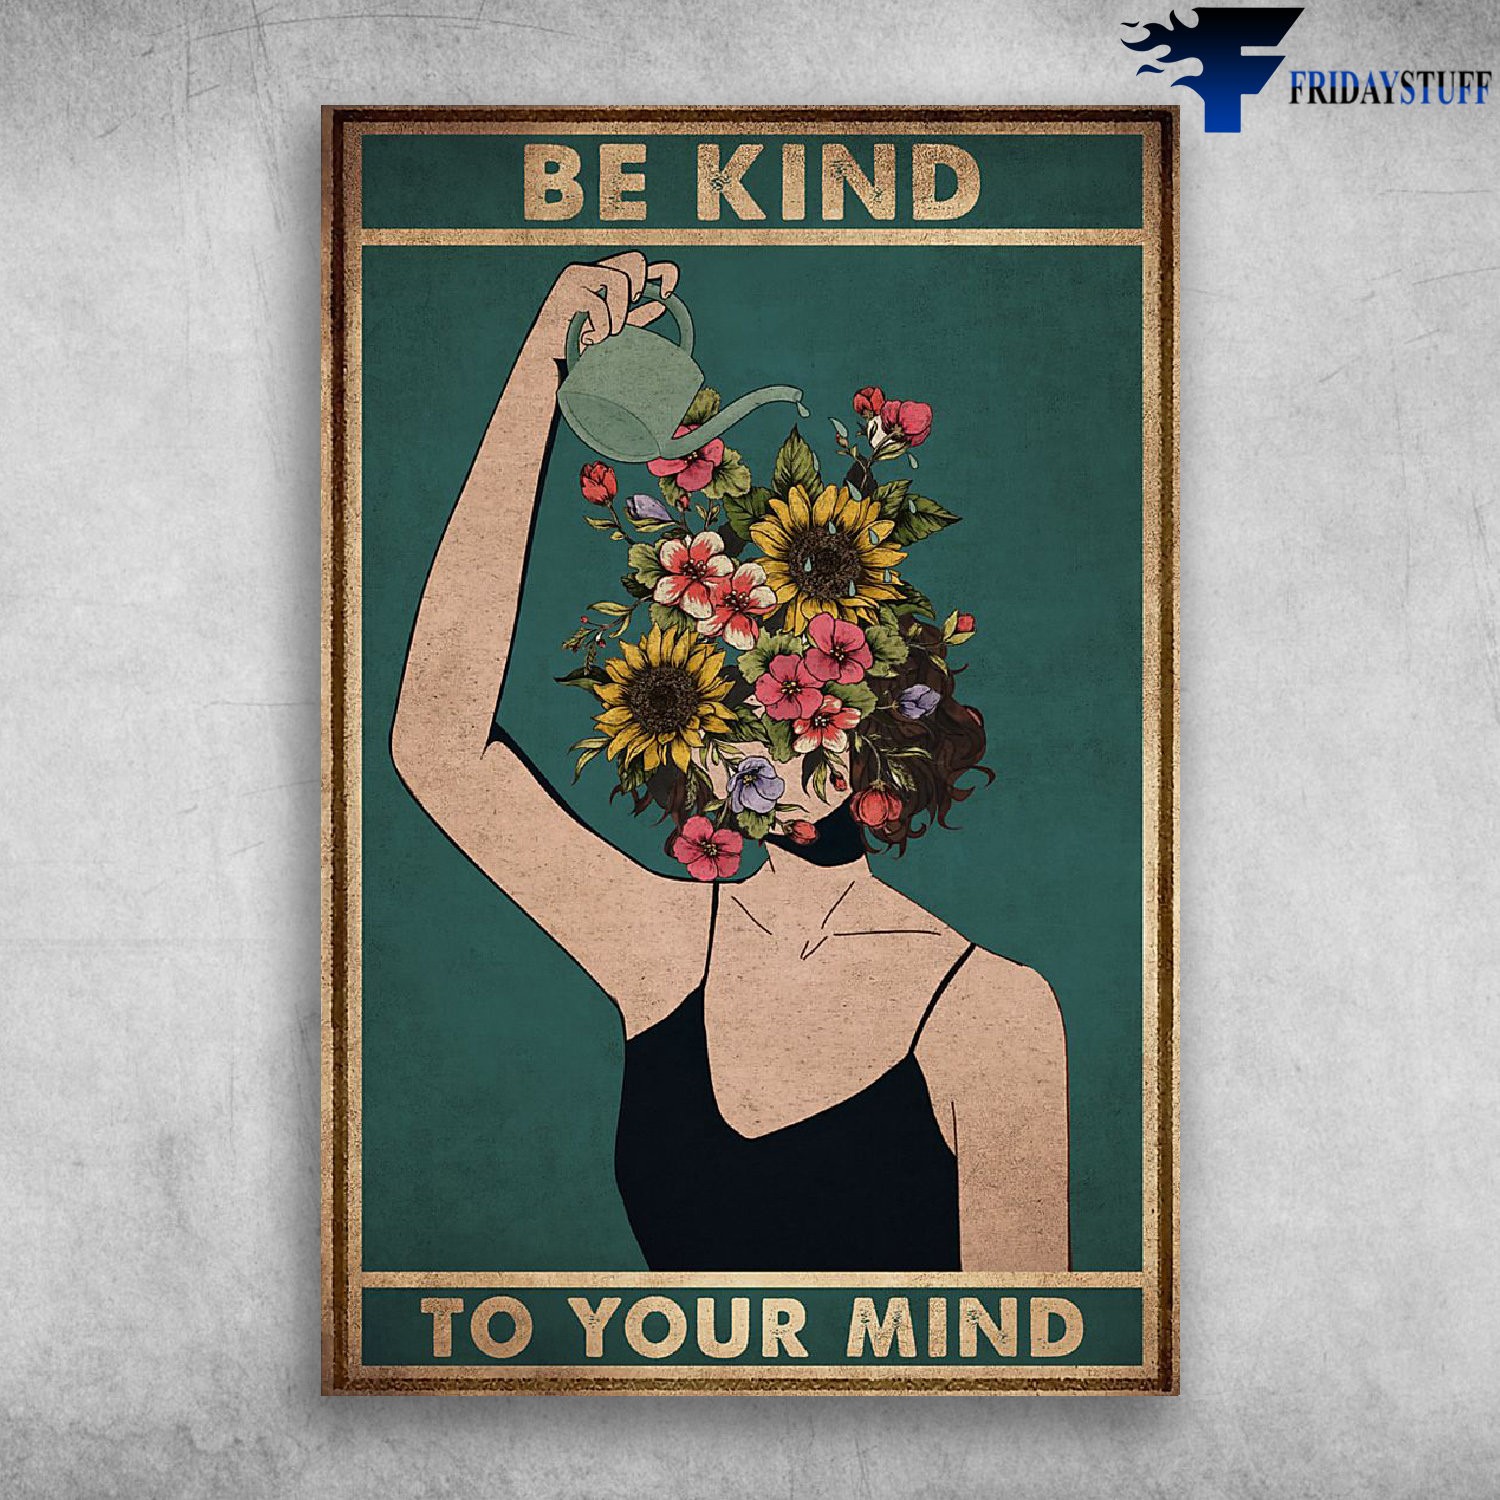 Be Kind To Your Mind - Girl Takes Care Of Flower Garden